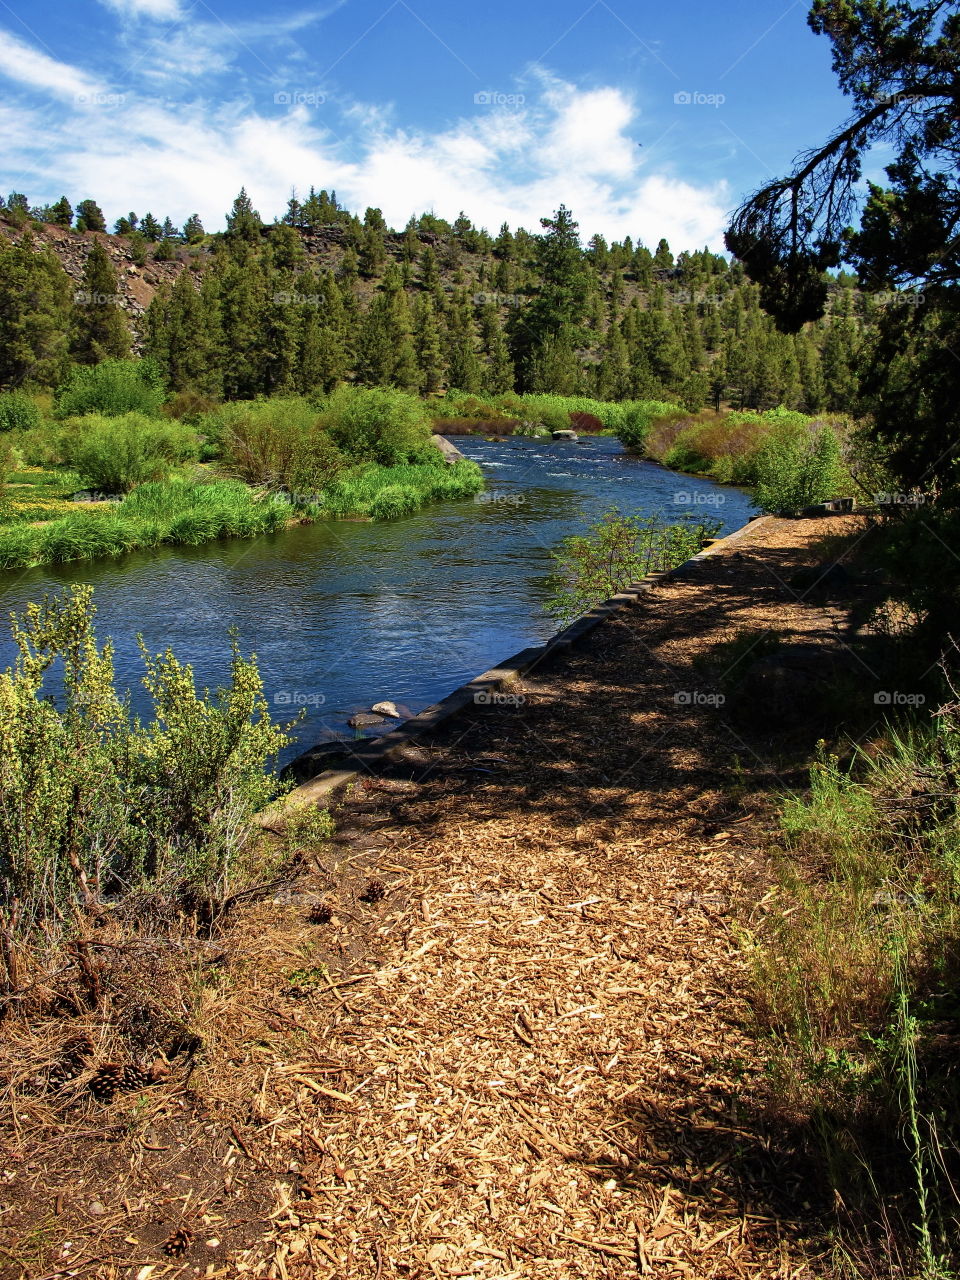 The beautiful waters of the Deschutes River in Central Oregon flowing through the forest in Central Oregon on a summer day 